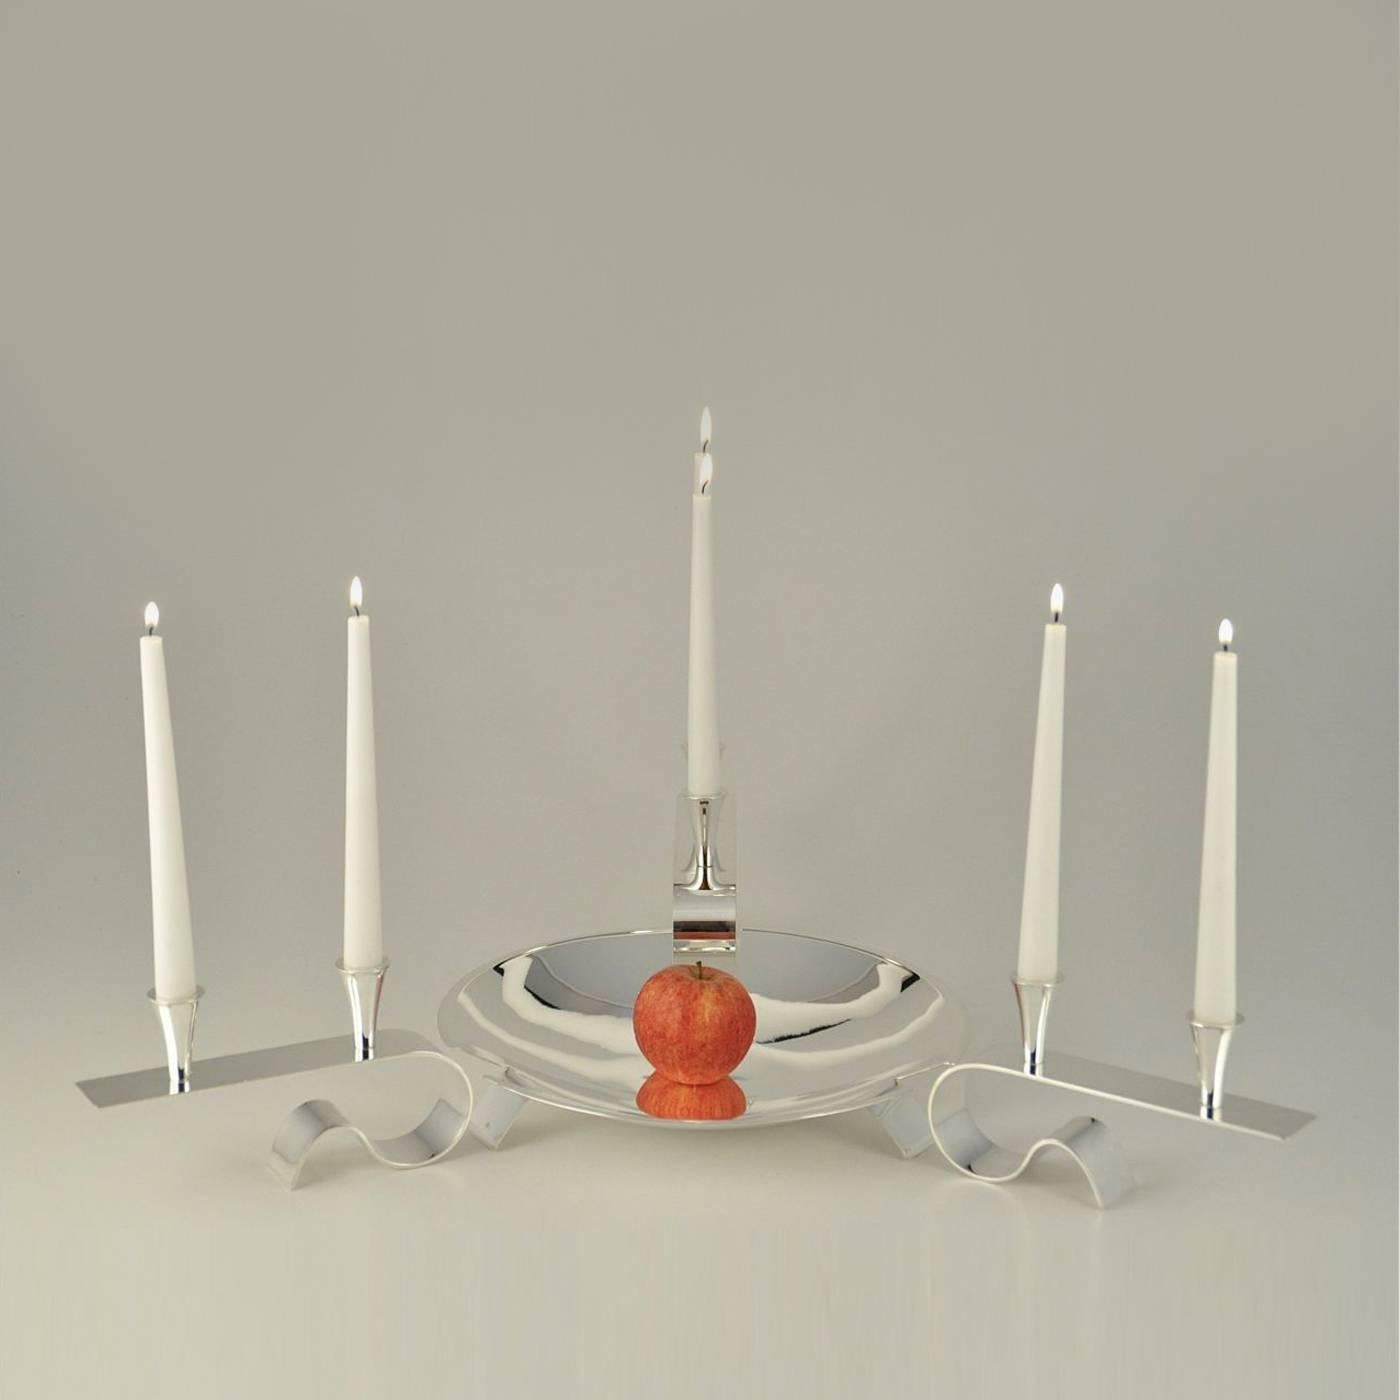 Centerpiece with an elegant central vessel for fruits or finger food and three two-flame candle holders. The vessel is handmade and three cuts create the three legs that support it. The exquisite candle-holders are flame-glazed by hand. The metal is